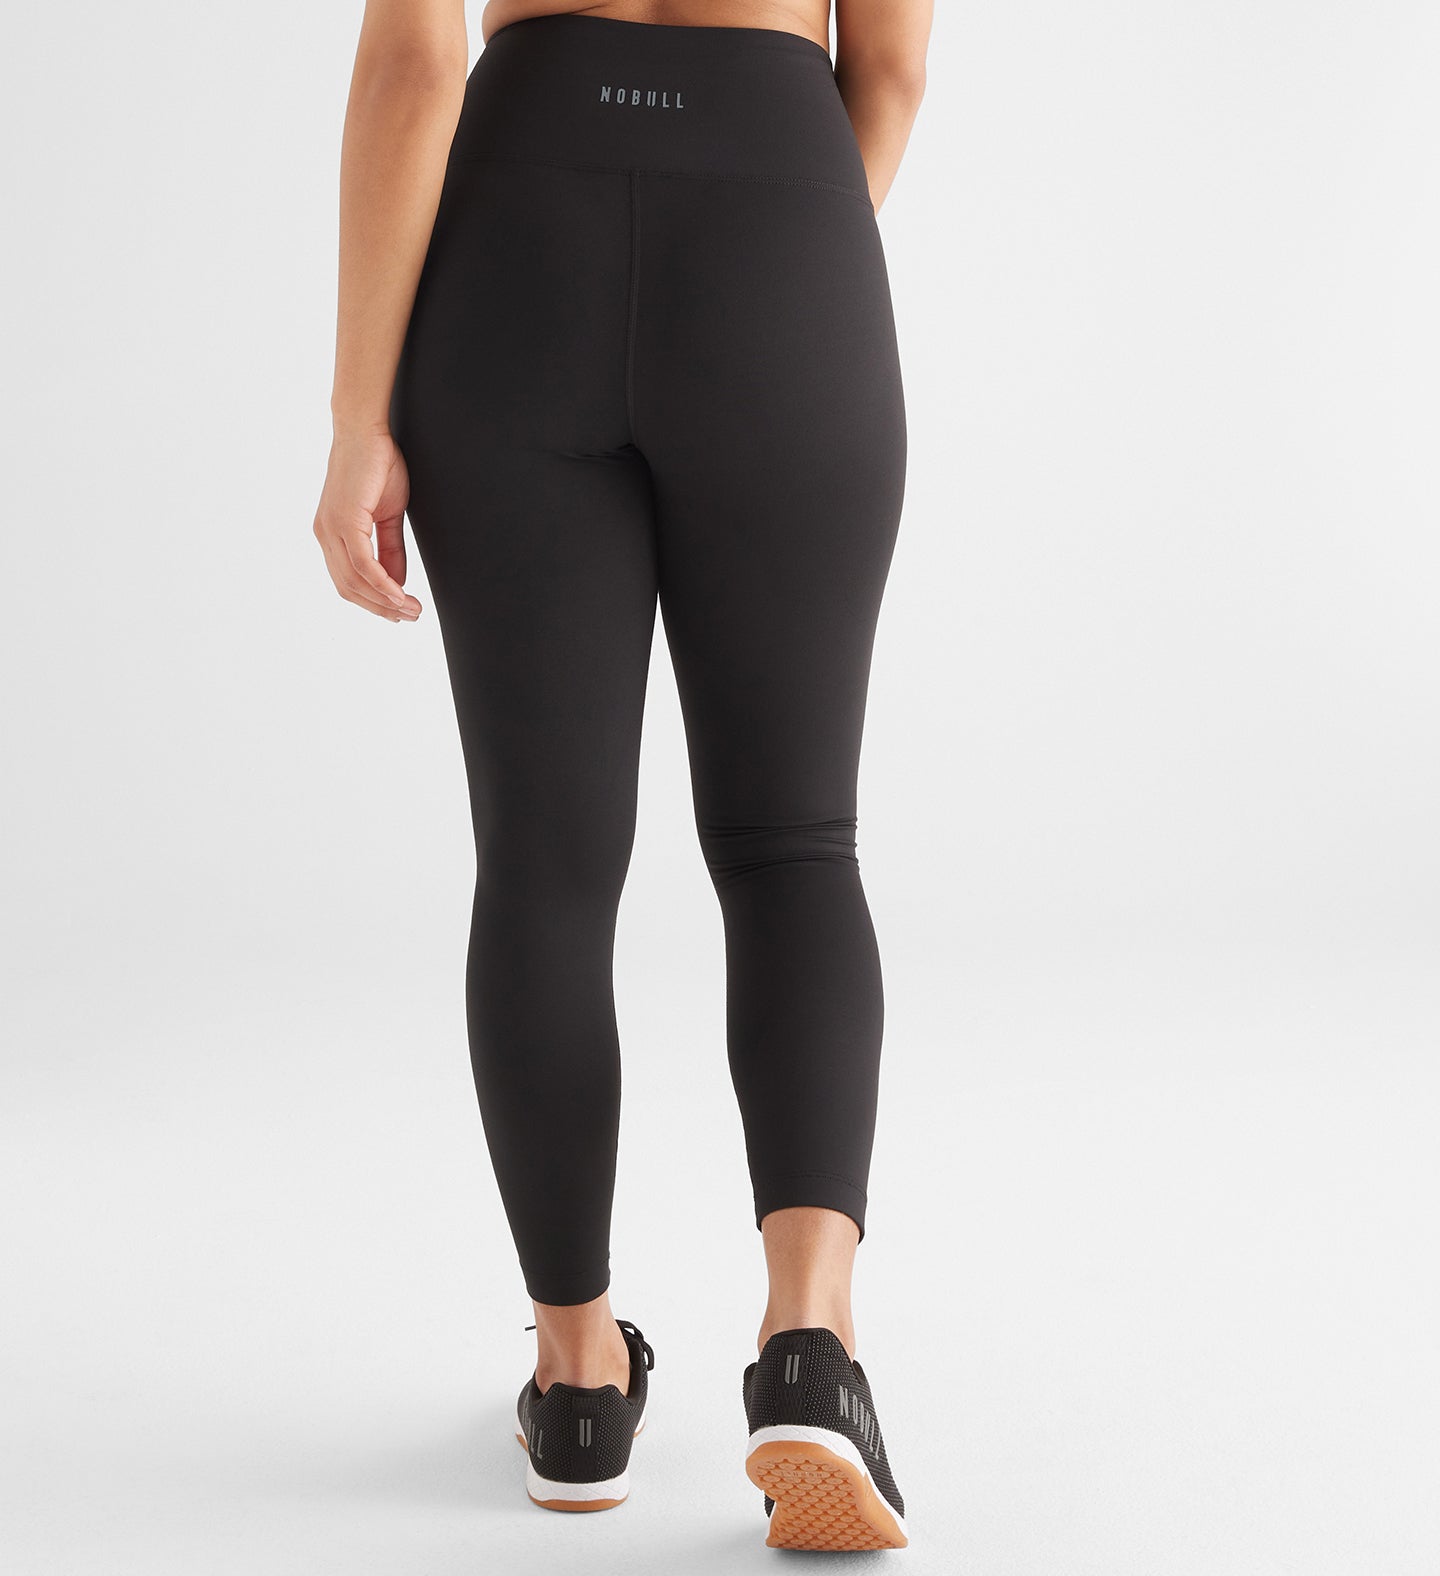 Pre-Owned Lululemon Athletica Womens Size 12 Active Ghana